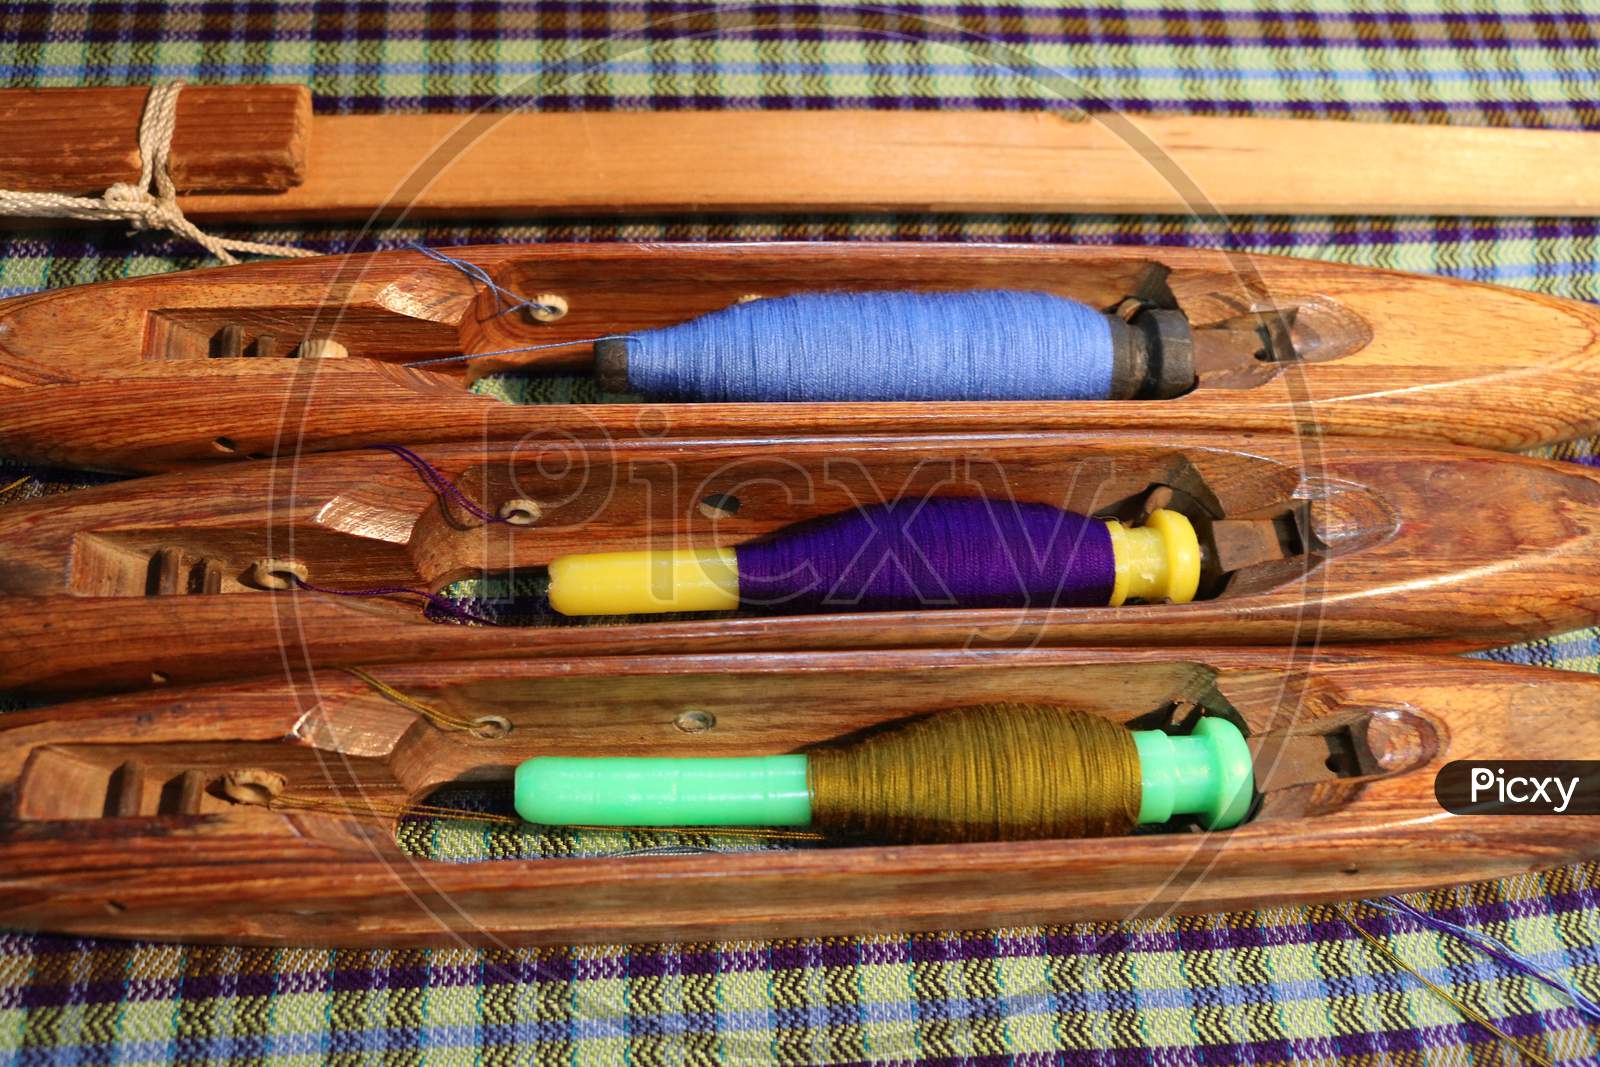 Handloom Shuttles used by the weavers of India.